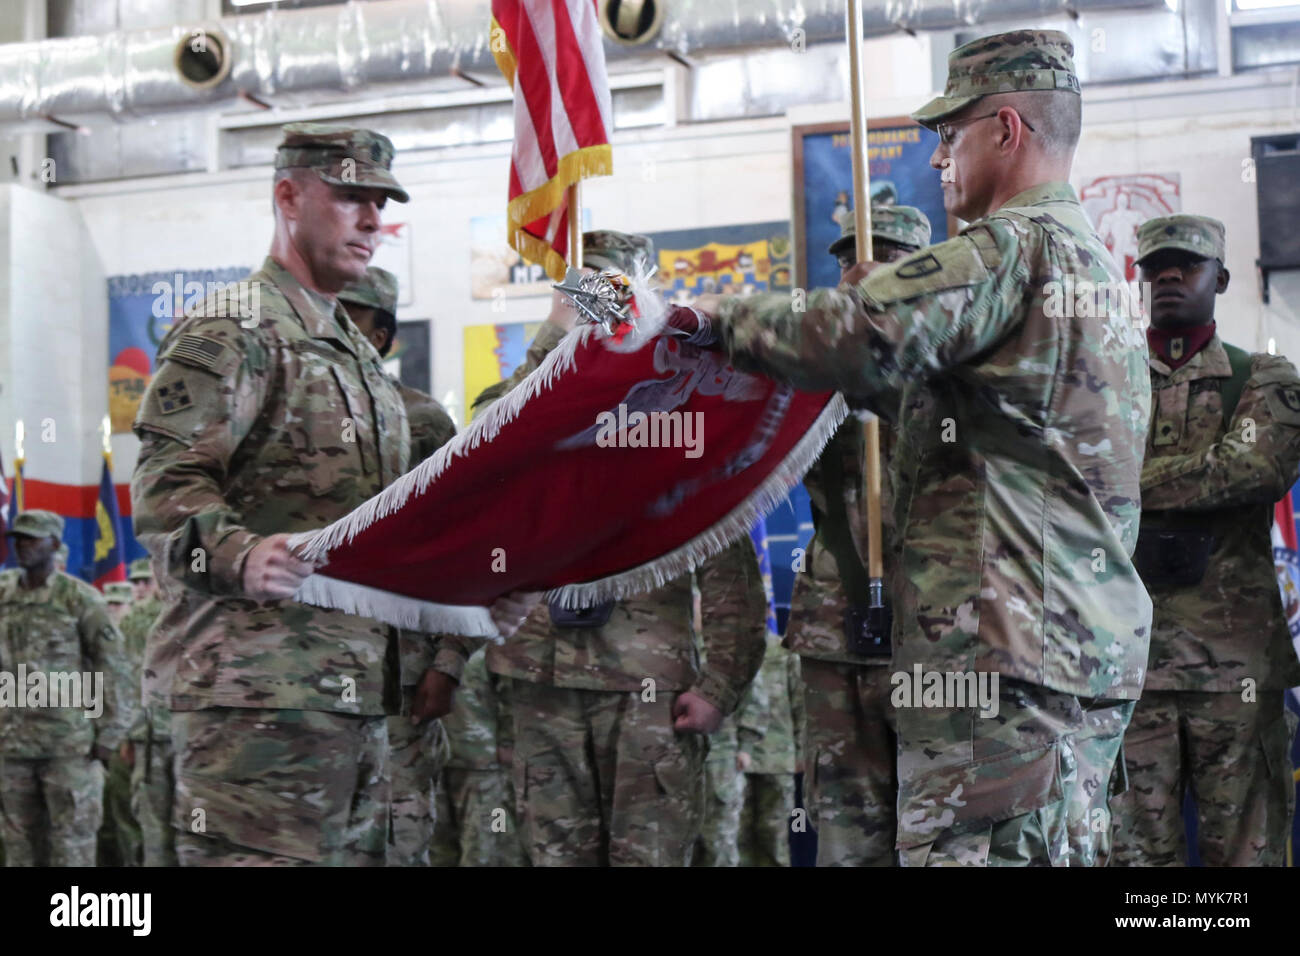 Col. Bruce Syvinski (right), the commander of the 86th Combat Support Hospital, and Command Sgt. Maj. Daryl Forsythe, the command sergeant major for the 86th CSH, uncases the unit’s colors, during the transfer of authority ceremony, in the Zone 1 Fitness Center, Camp Arifjan, Kuwait, May 5. The ceremony marked the last deployment for the 86th CSH, as it will re-designate into a field hospital when it returns from this rotation. Stock Photo